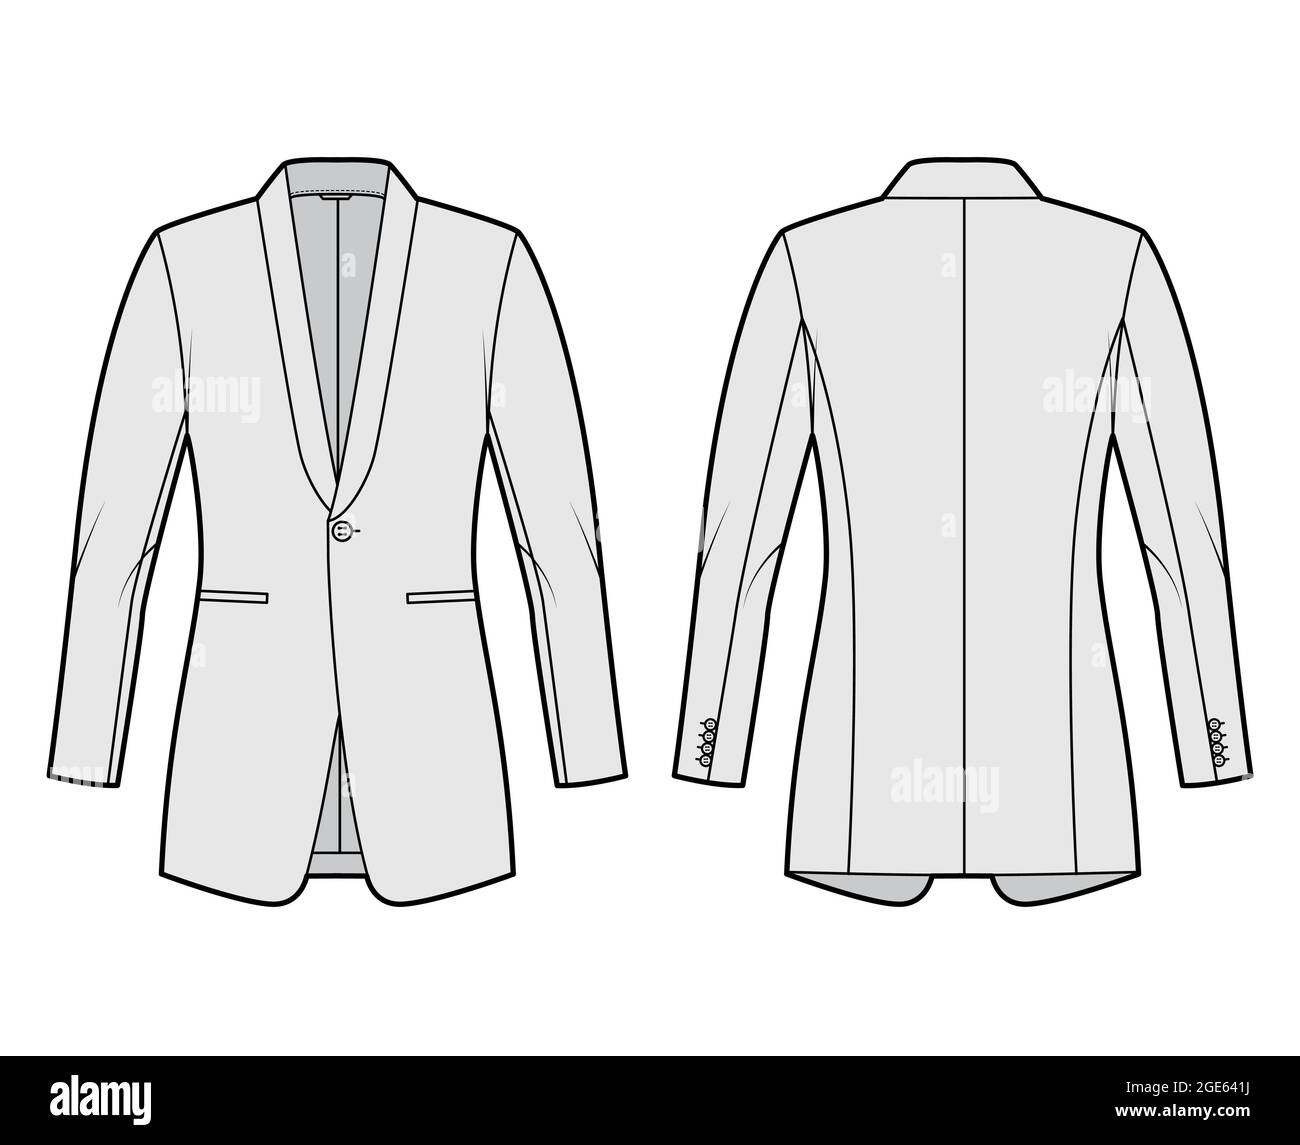 Dinner fitted jacket suit tuxedo technical fashion illustration with single breasted, long sleeves, jetted pockets. Flat coat blazer template front, back grey color style. Women, men unisex CAD mockup Stock Vector